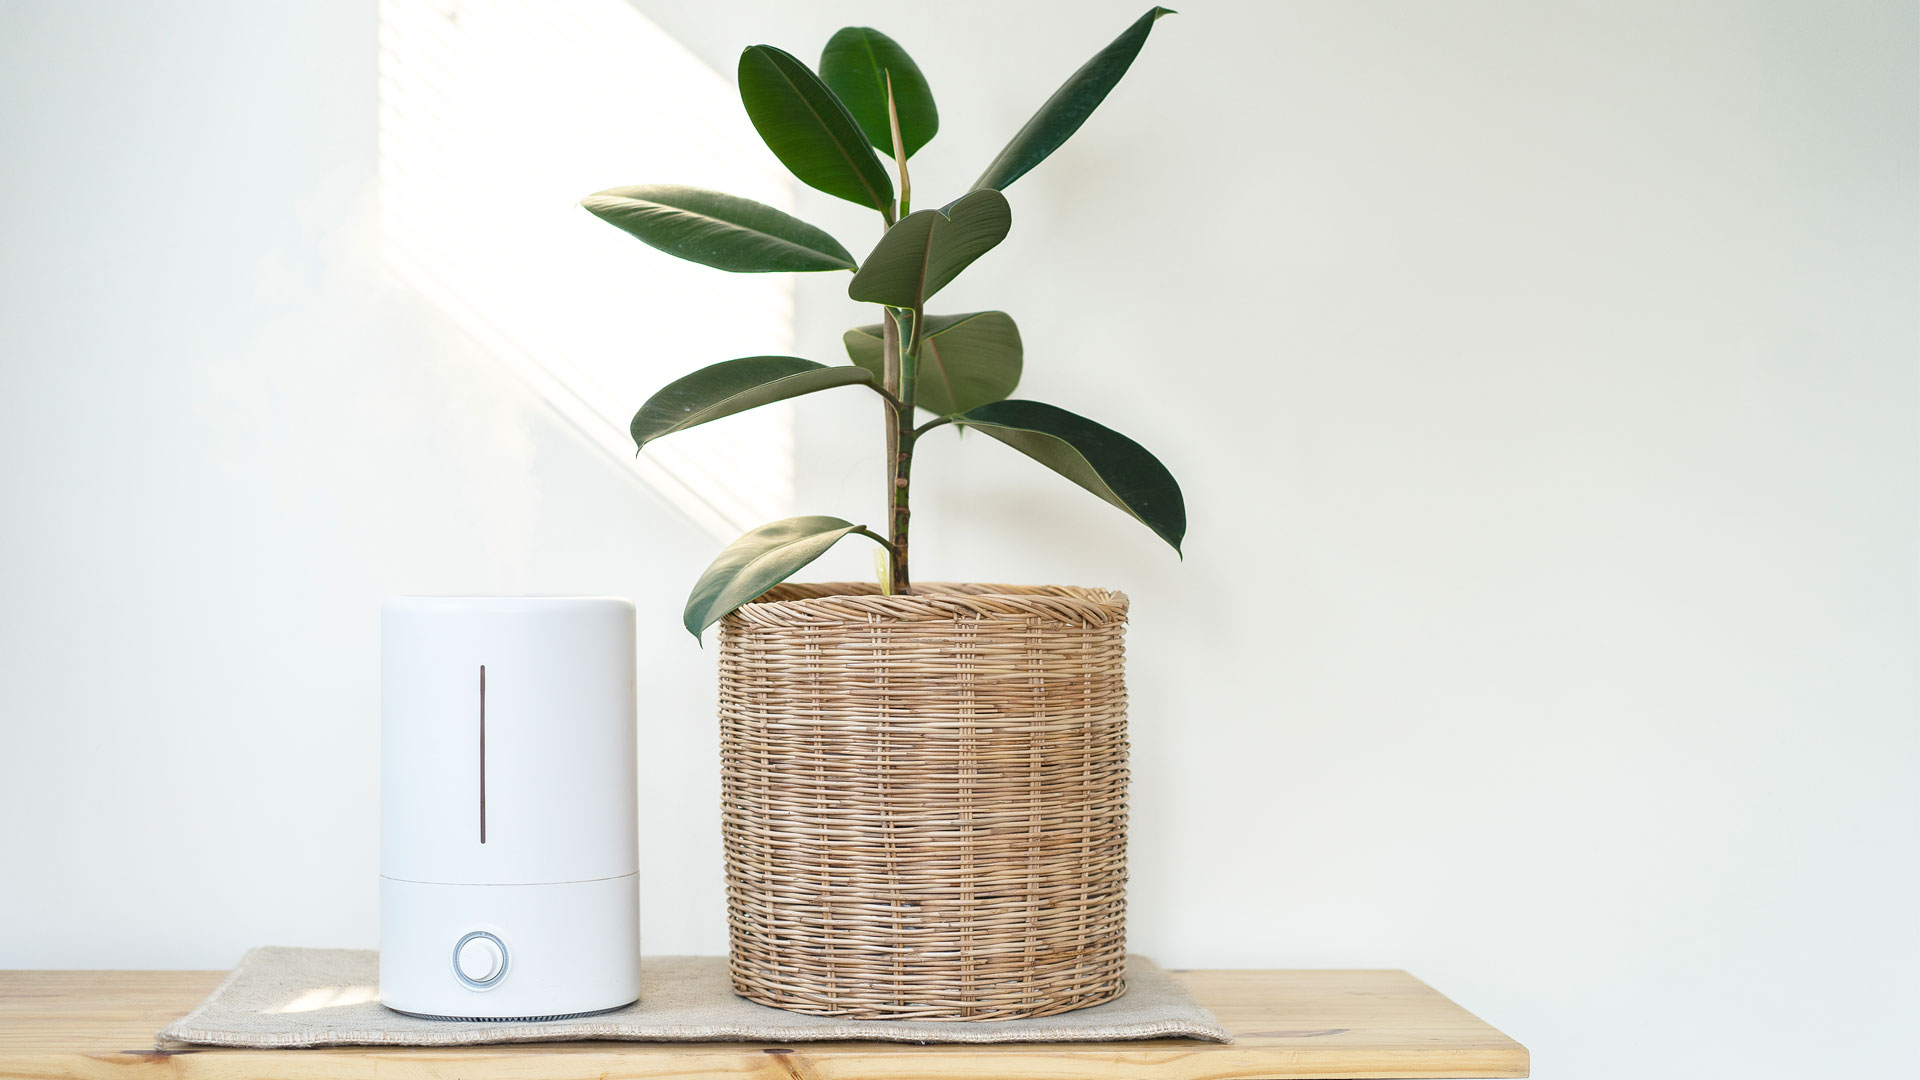 Air purifiers vs ionizers: Image shows air purifier next to a plant